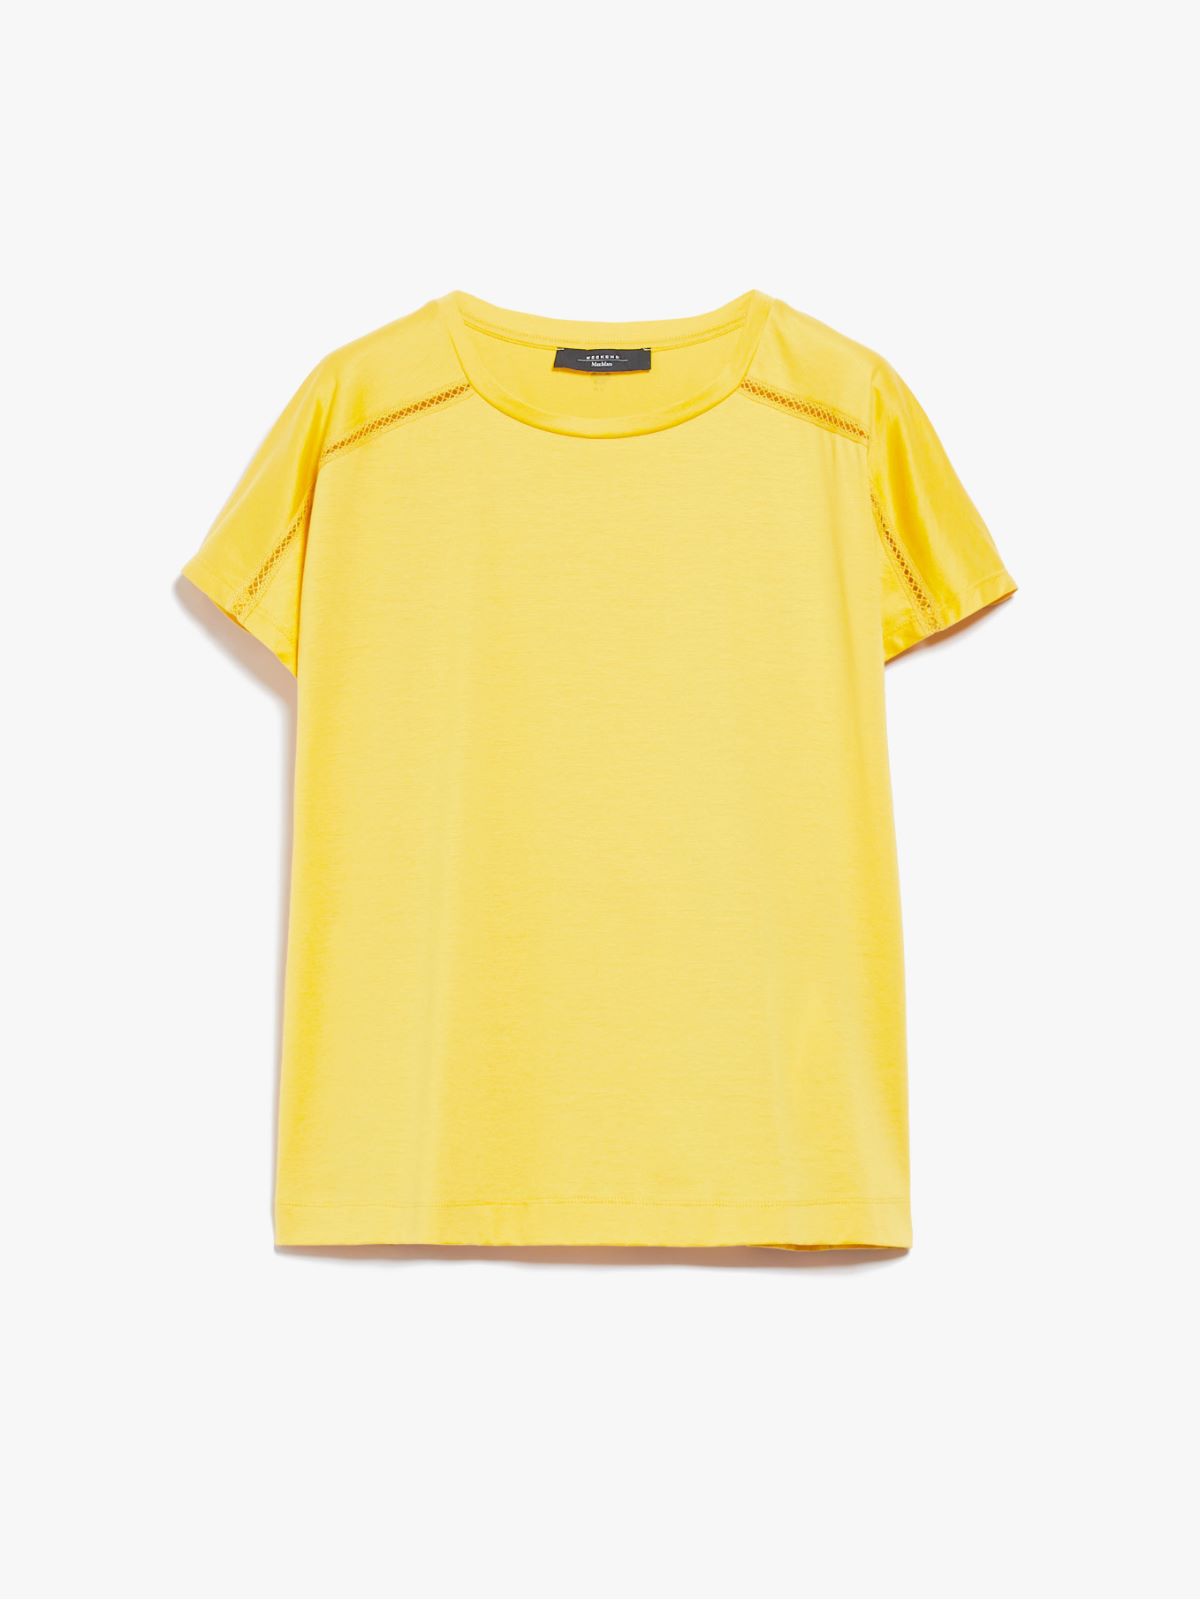 T-shirt in cotton jersey - BRIGHT YELLOW - Weekend Max Mara - 6